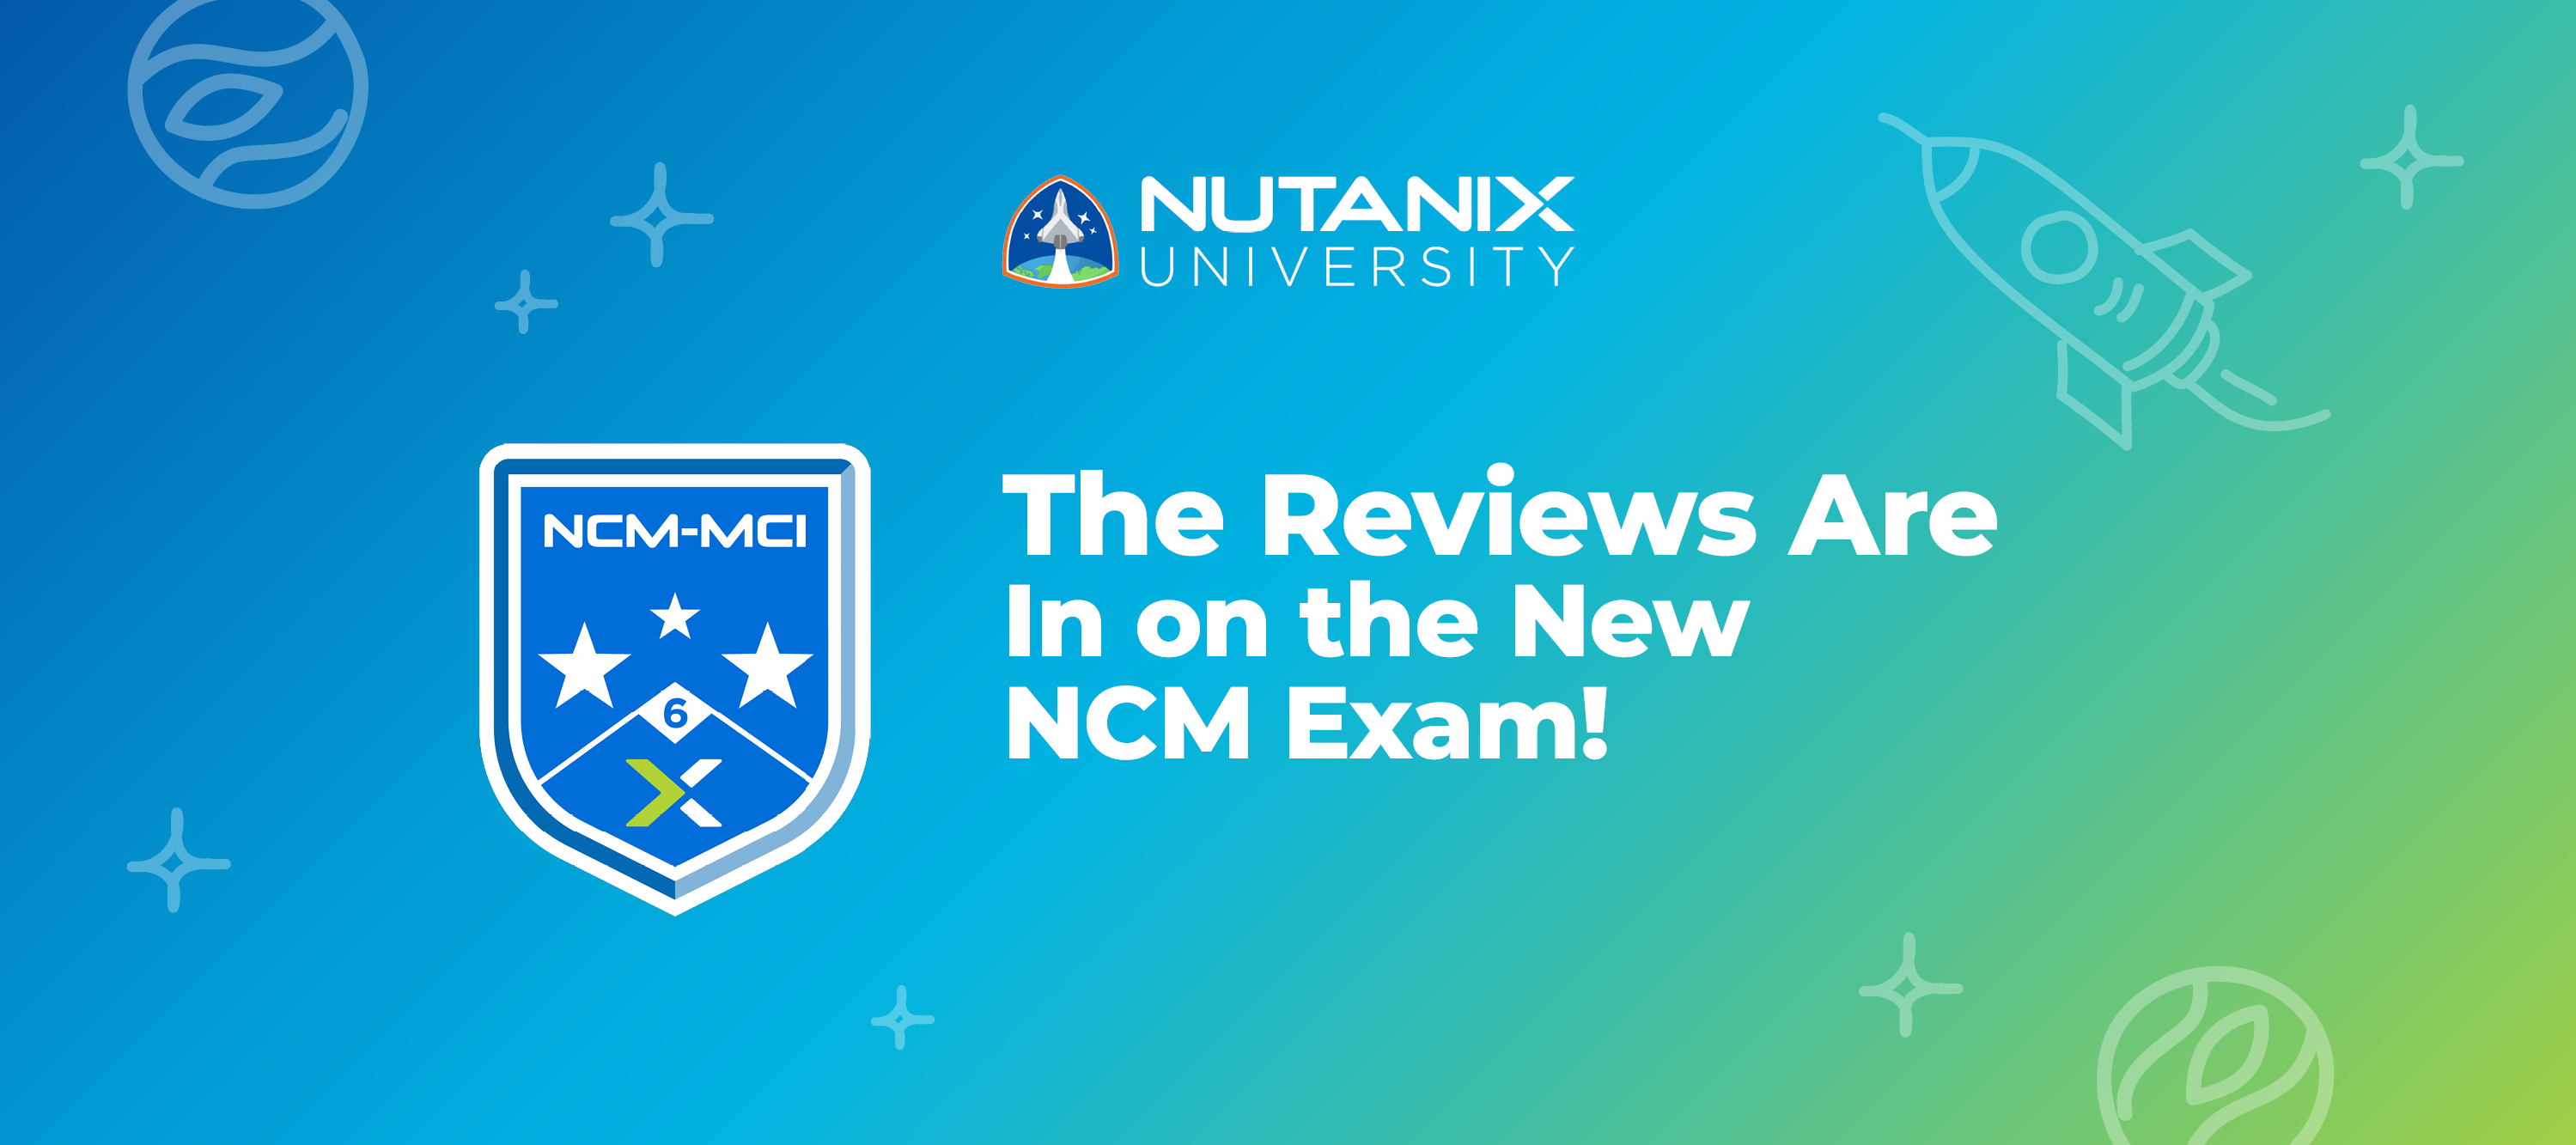 The Reviews Are In on the New NCM Exam!